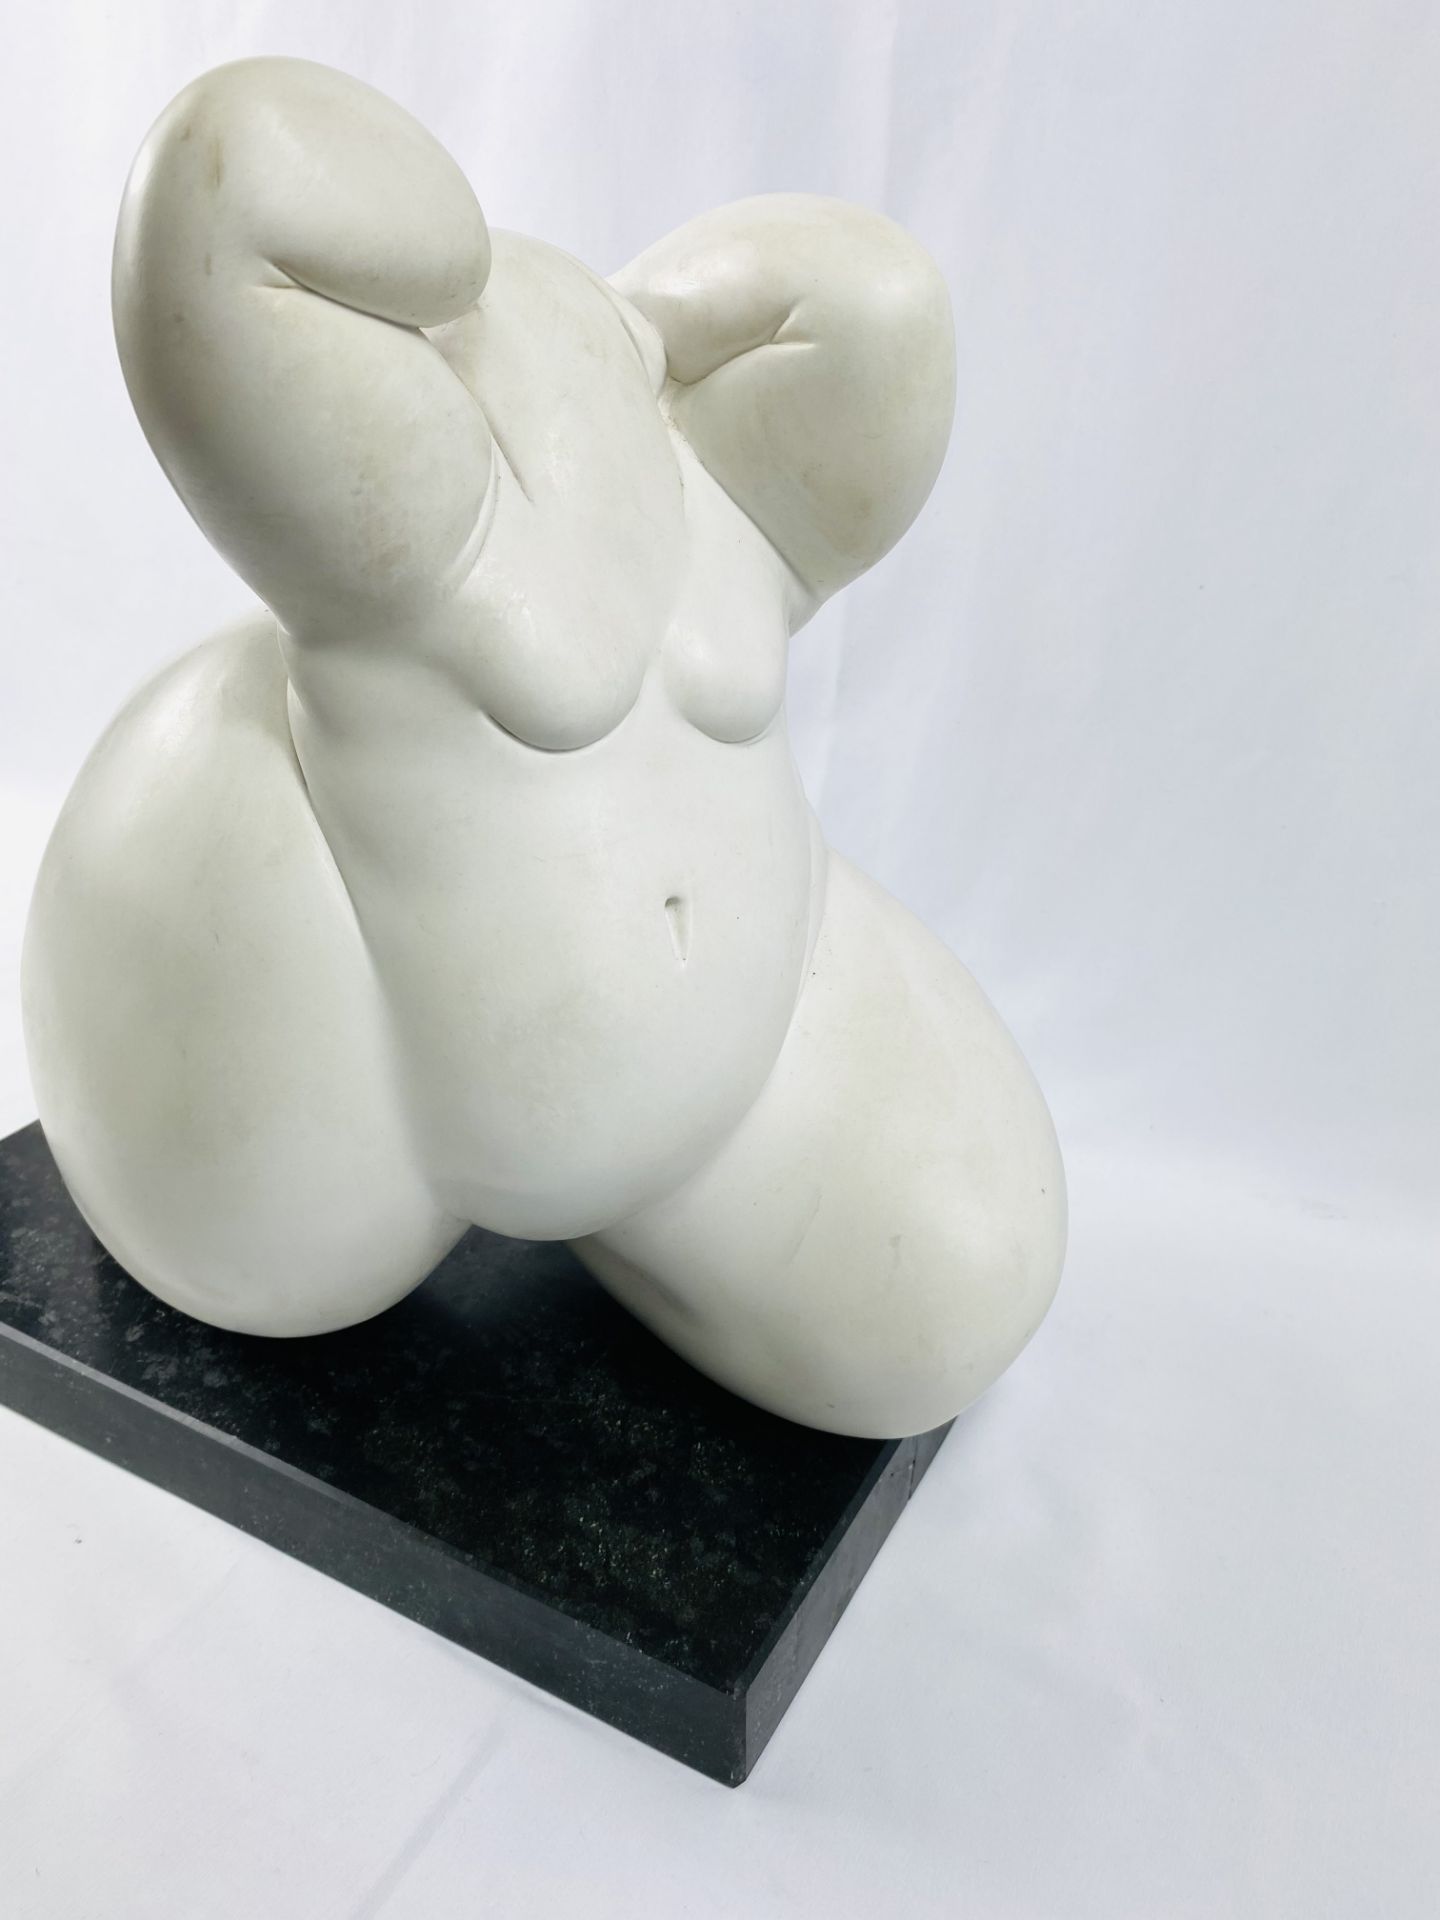 Composite sculpture of a female figure on a stone base - Image 3 of 4